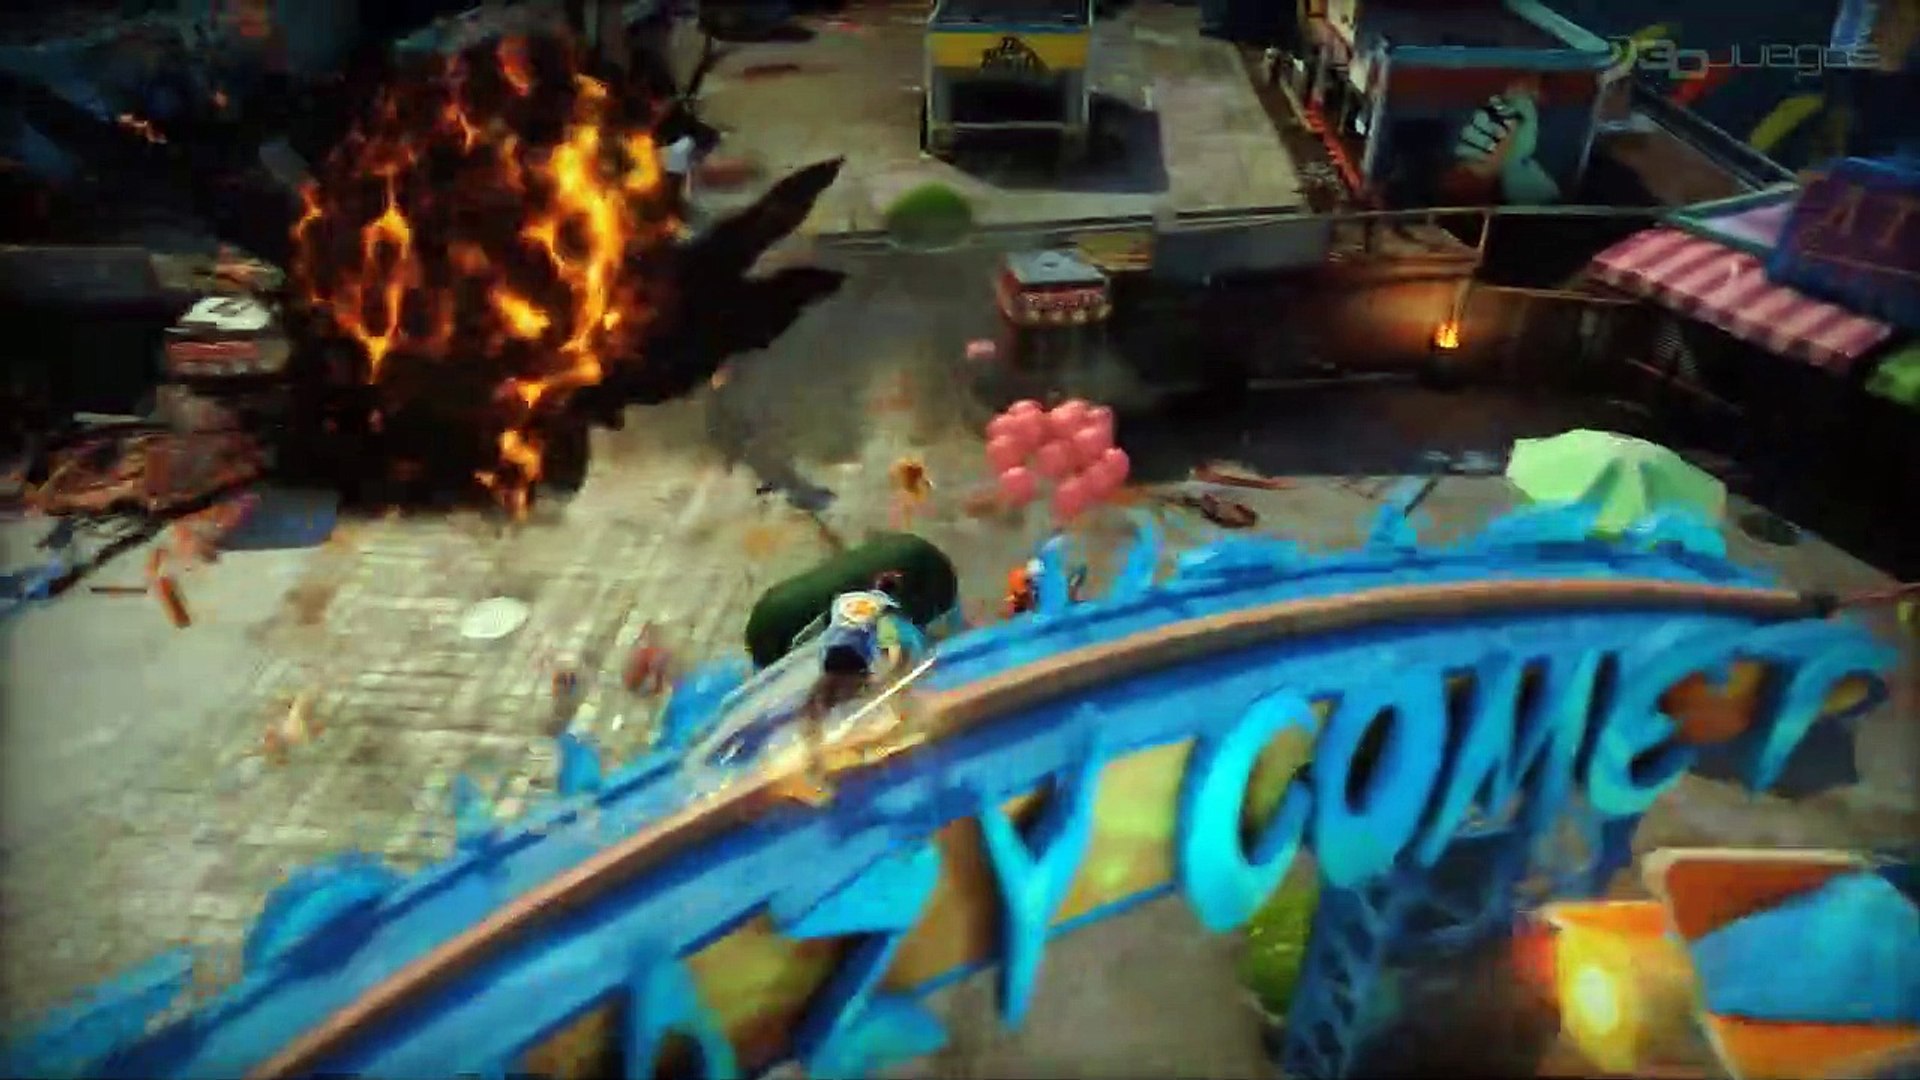 Sunset Overdrive E3 Trailer and Gameplay Demo - video Dailymotion